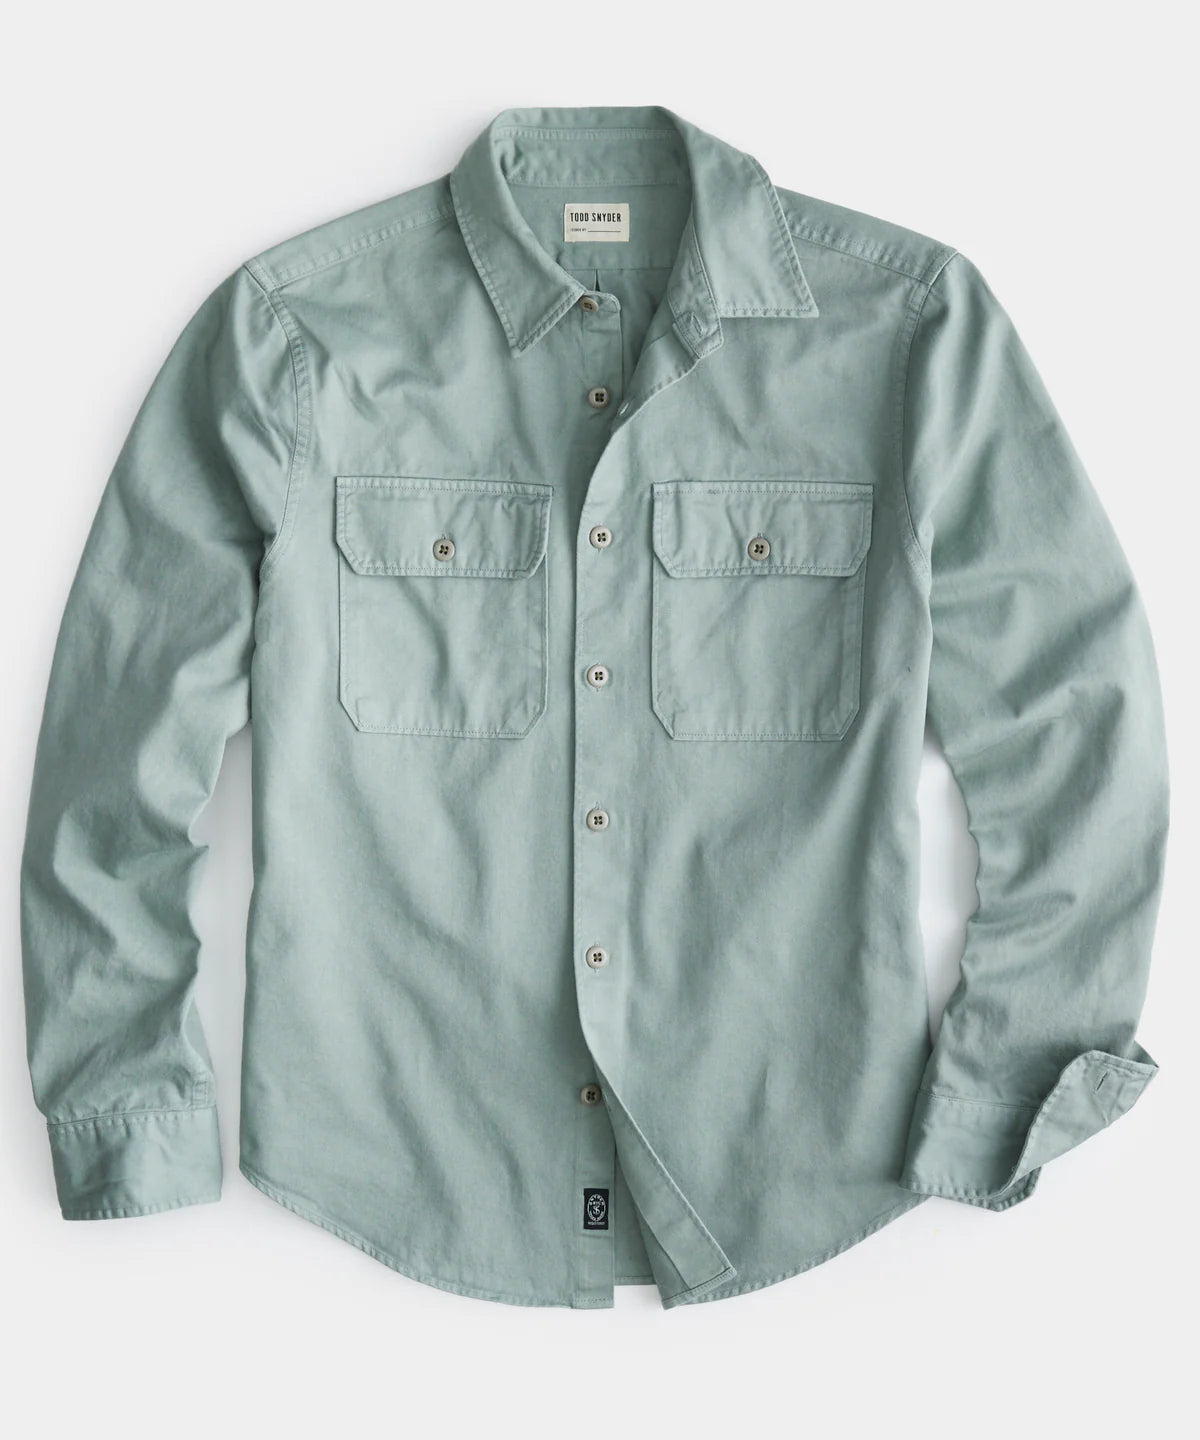 TODD SNYDER TWO POCKET UTILITY LONG SLEEVE SHIRT IN SOFT SAGE